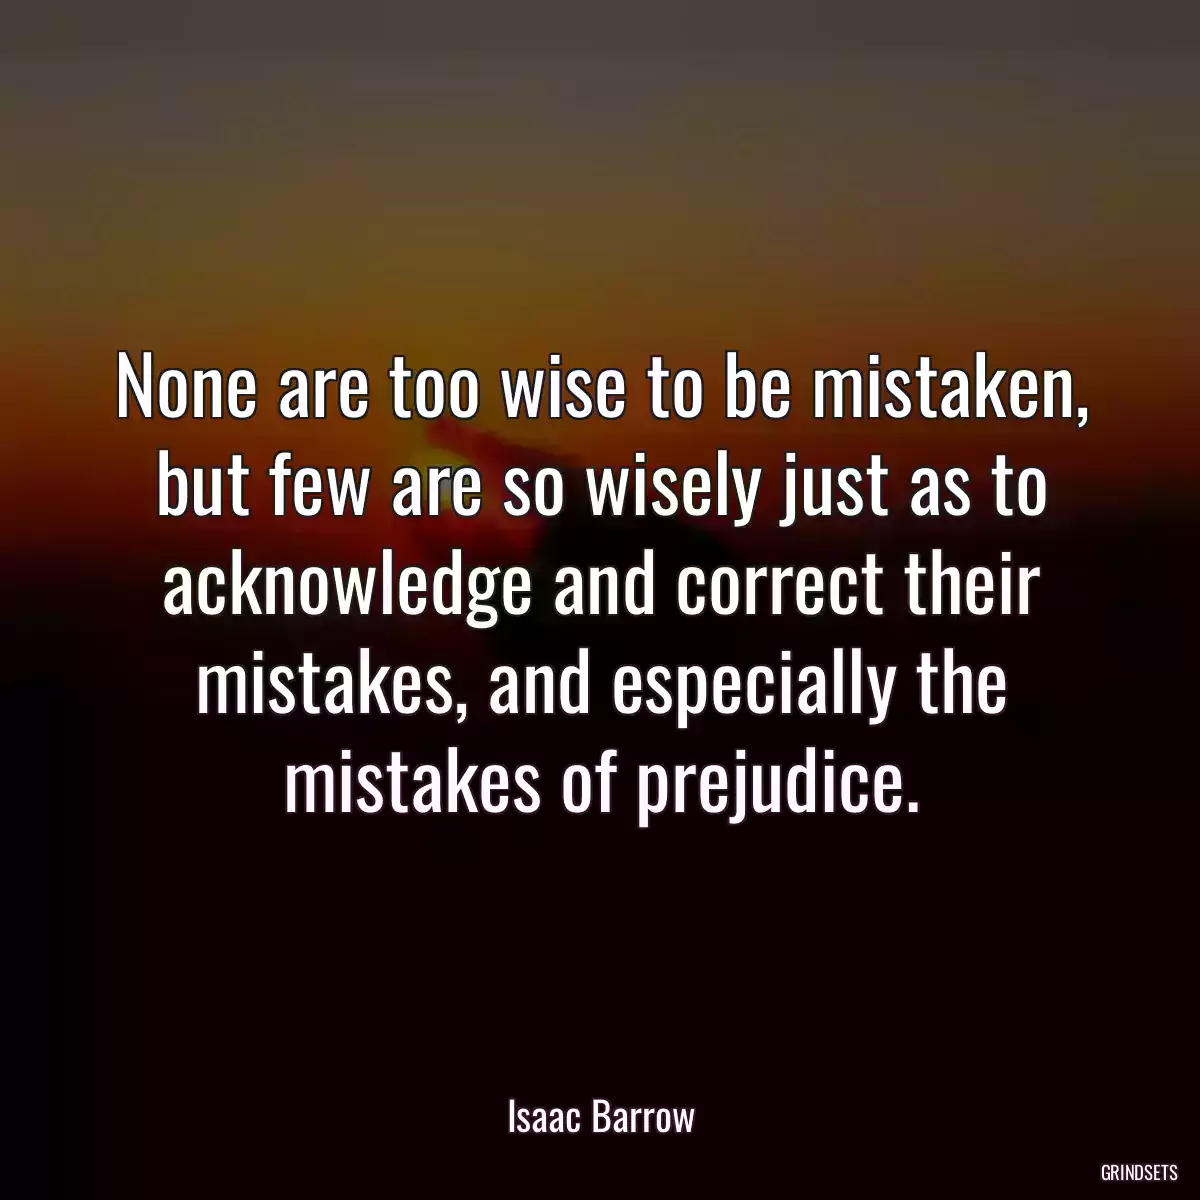 None are too wise to be mistaken, but few are so wisely just as to acknowledge and correct their mistakes, and especially the mistakes of prejudice.